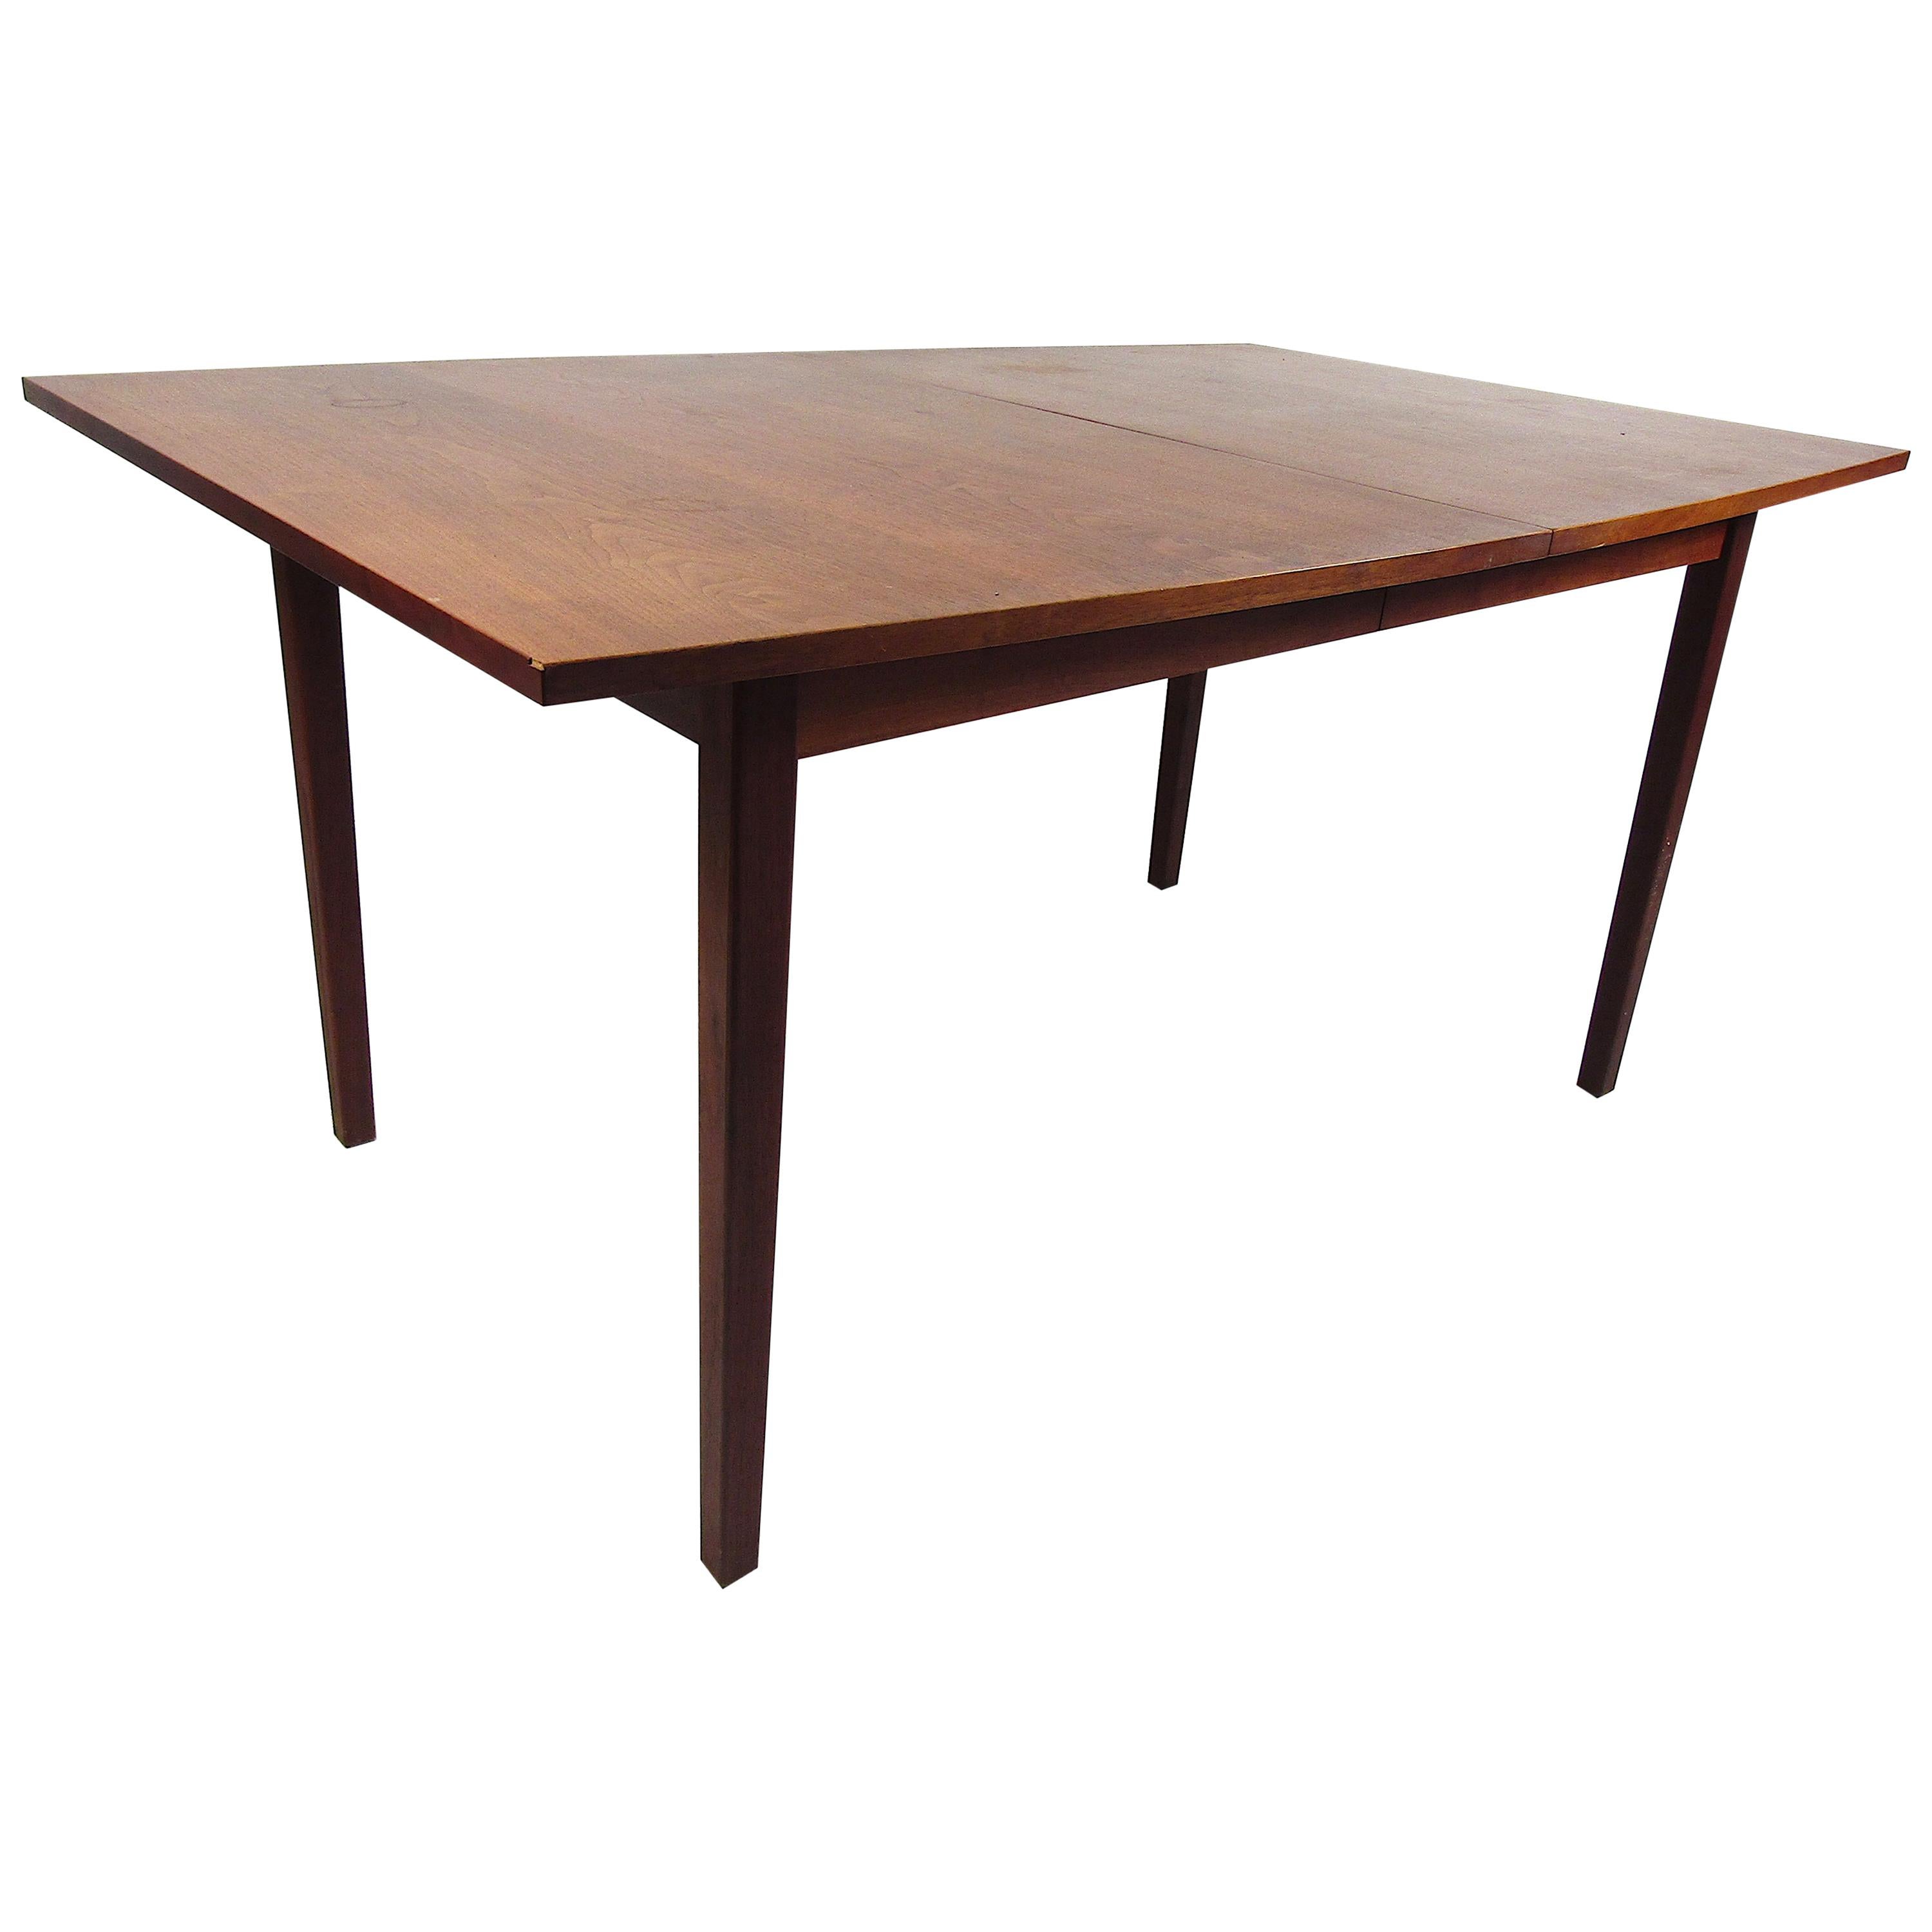 Midcentury Dining Table